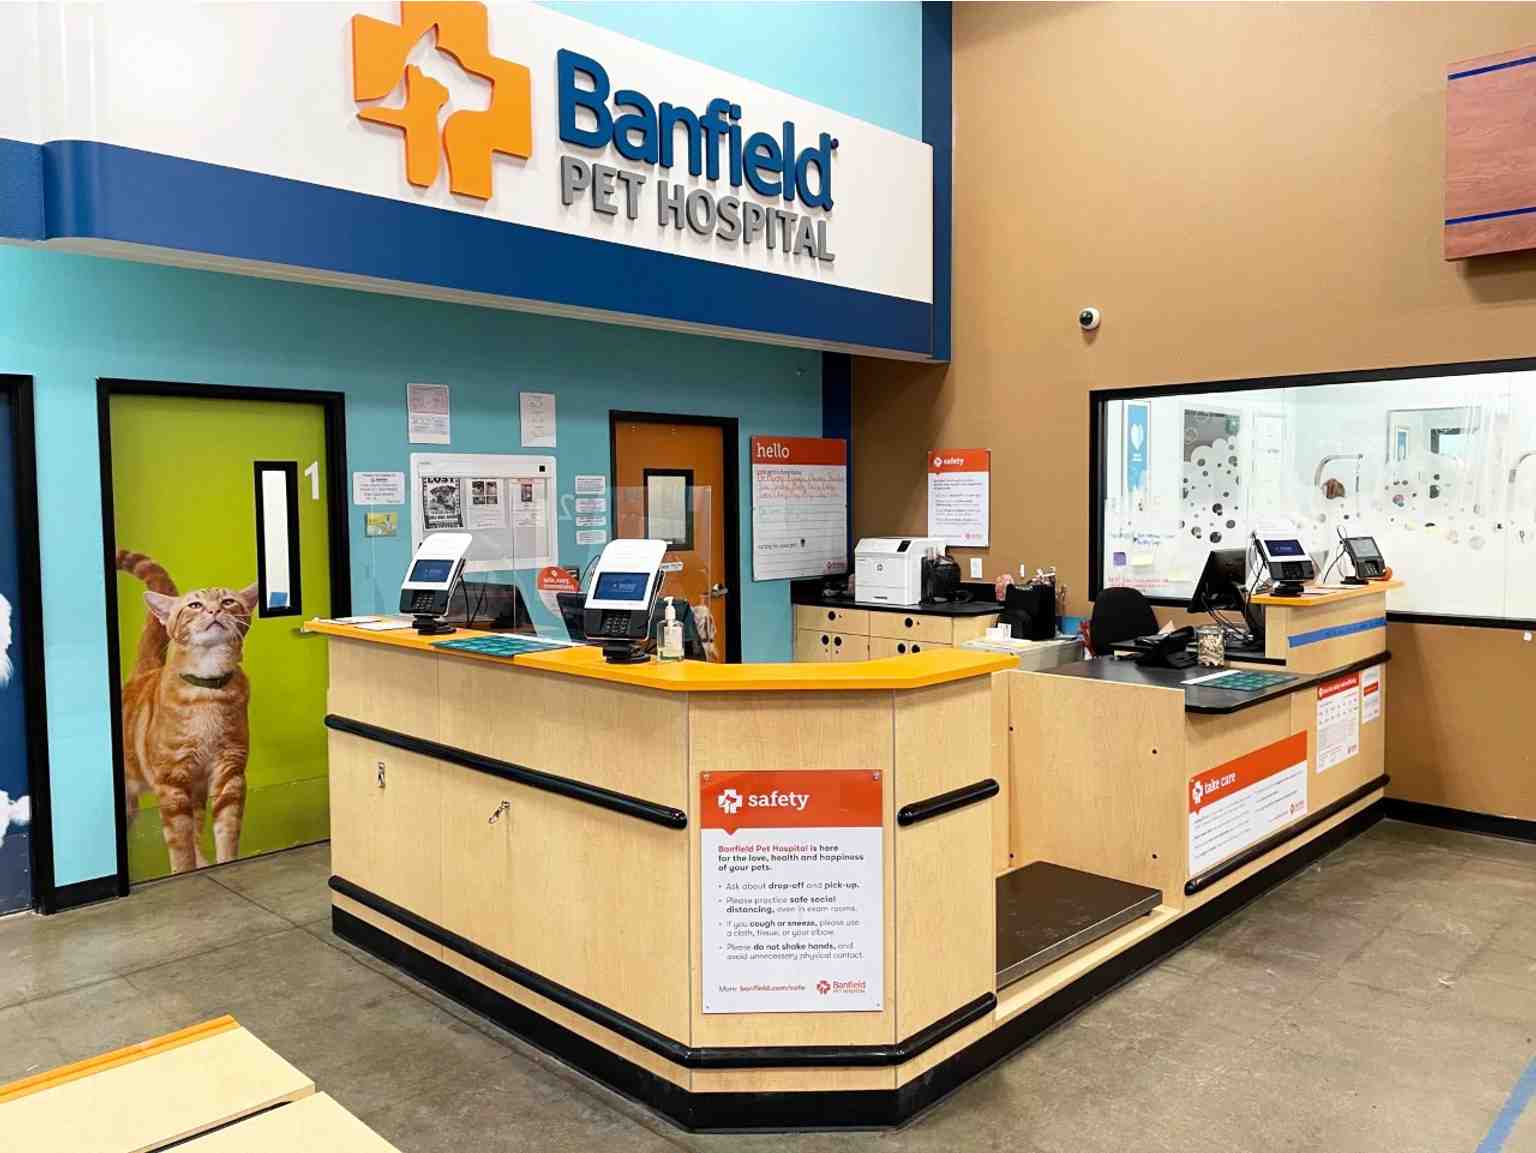 The front desk at the Banfield Pet Hospital